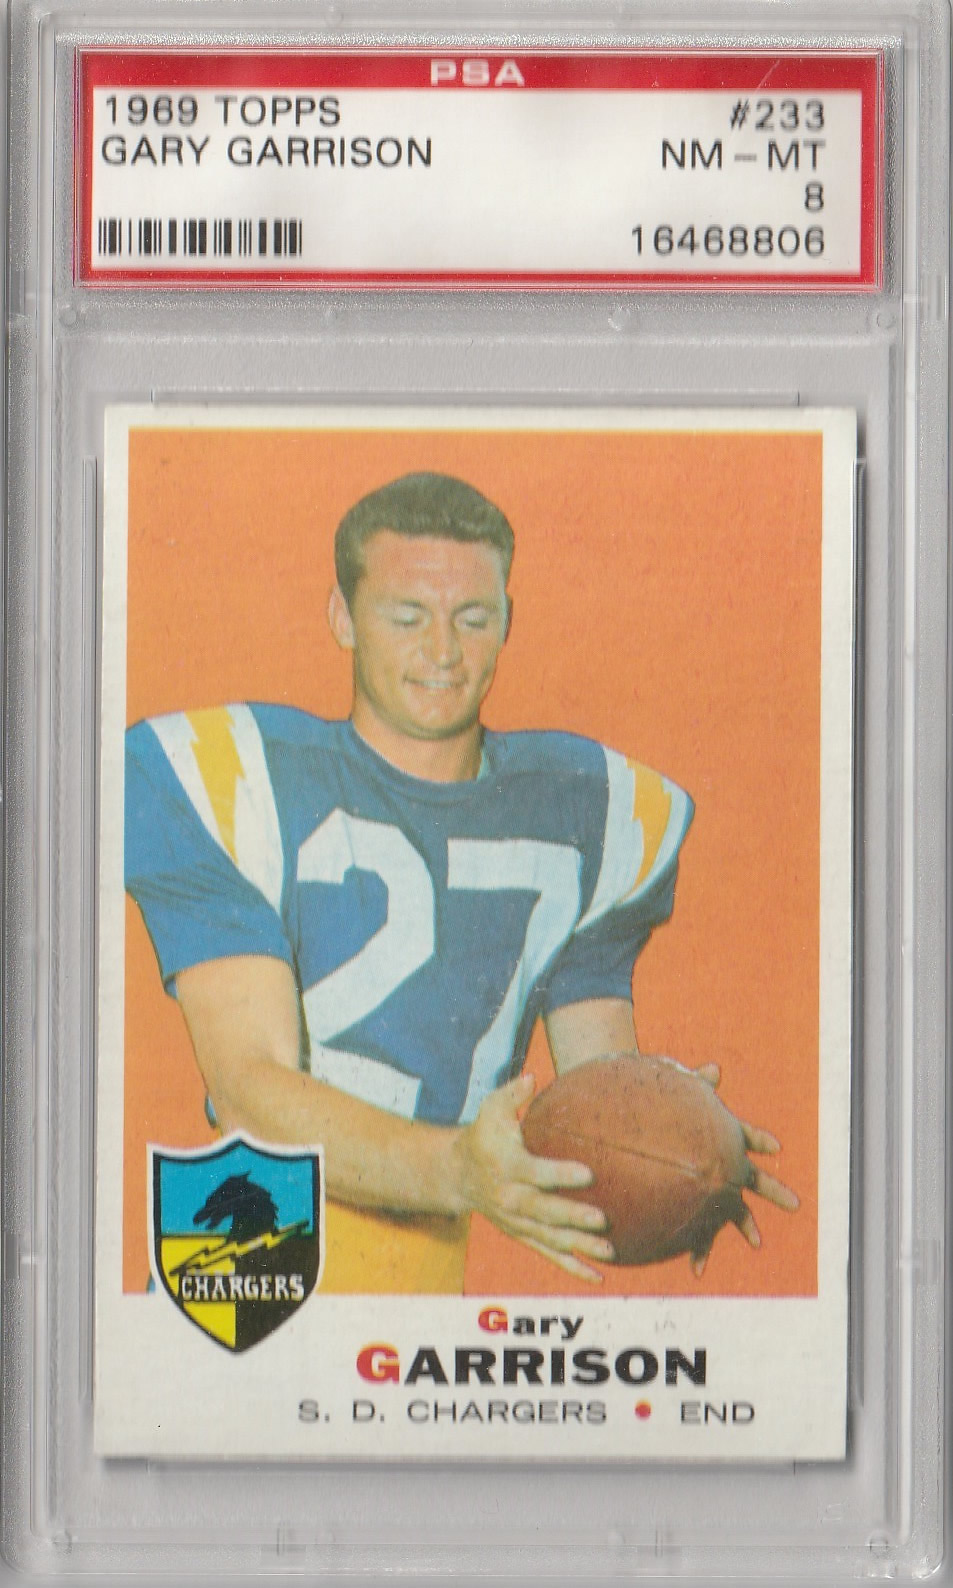 1969 Topps #233 GARY GARRISON San Diego Chargers State PSA 8